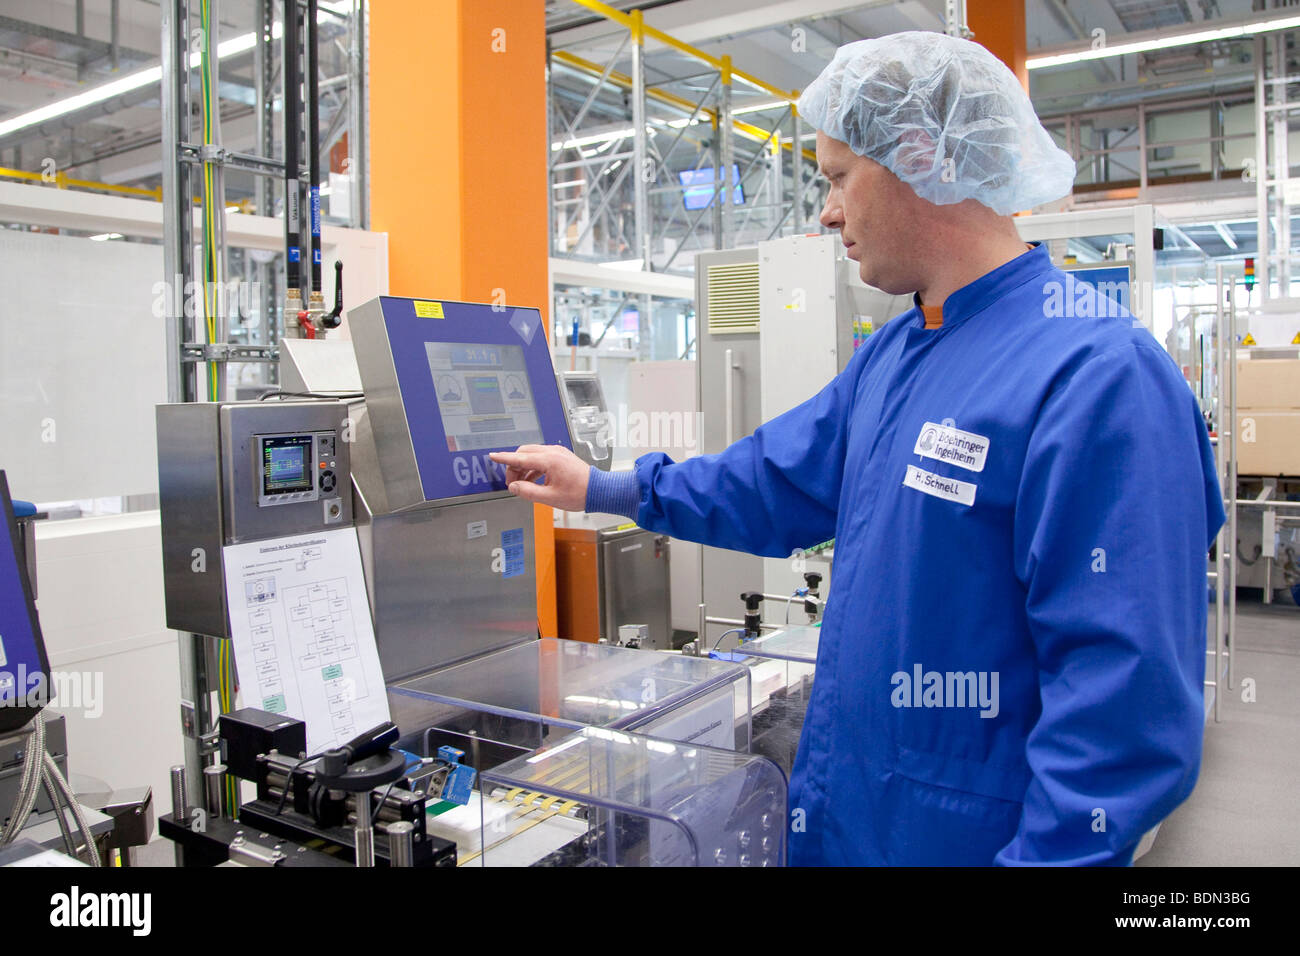 Employee of Boehringer Ingelheim GmbH, checking a packaging machine in the logistics and packaging center, pharmaceutical compa Stock Photo